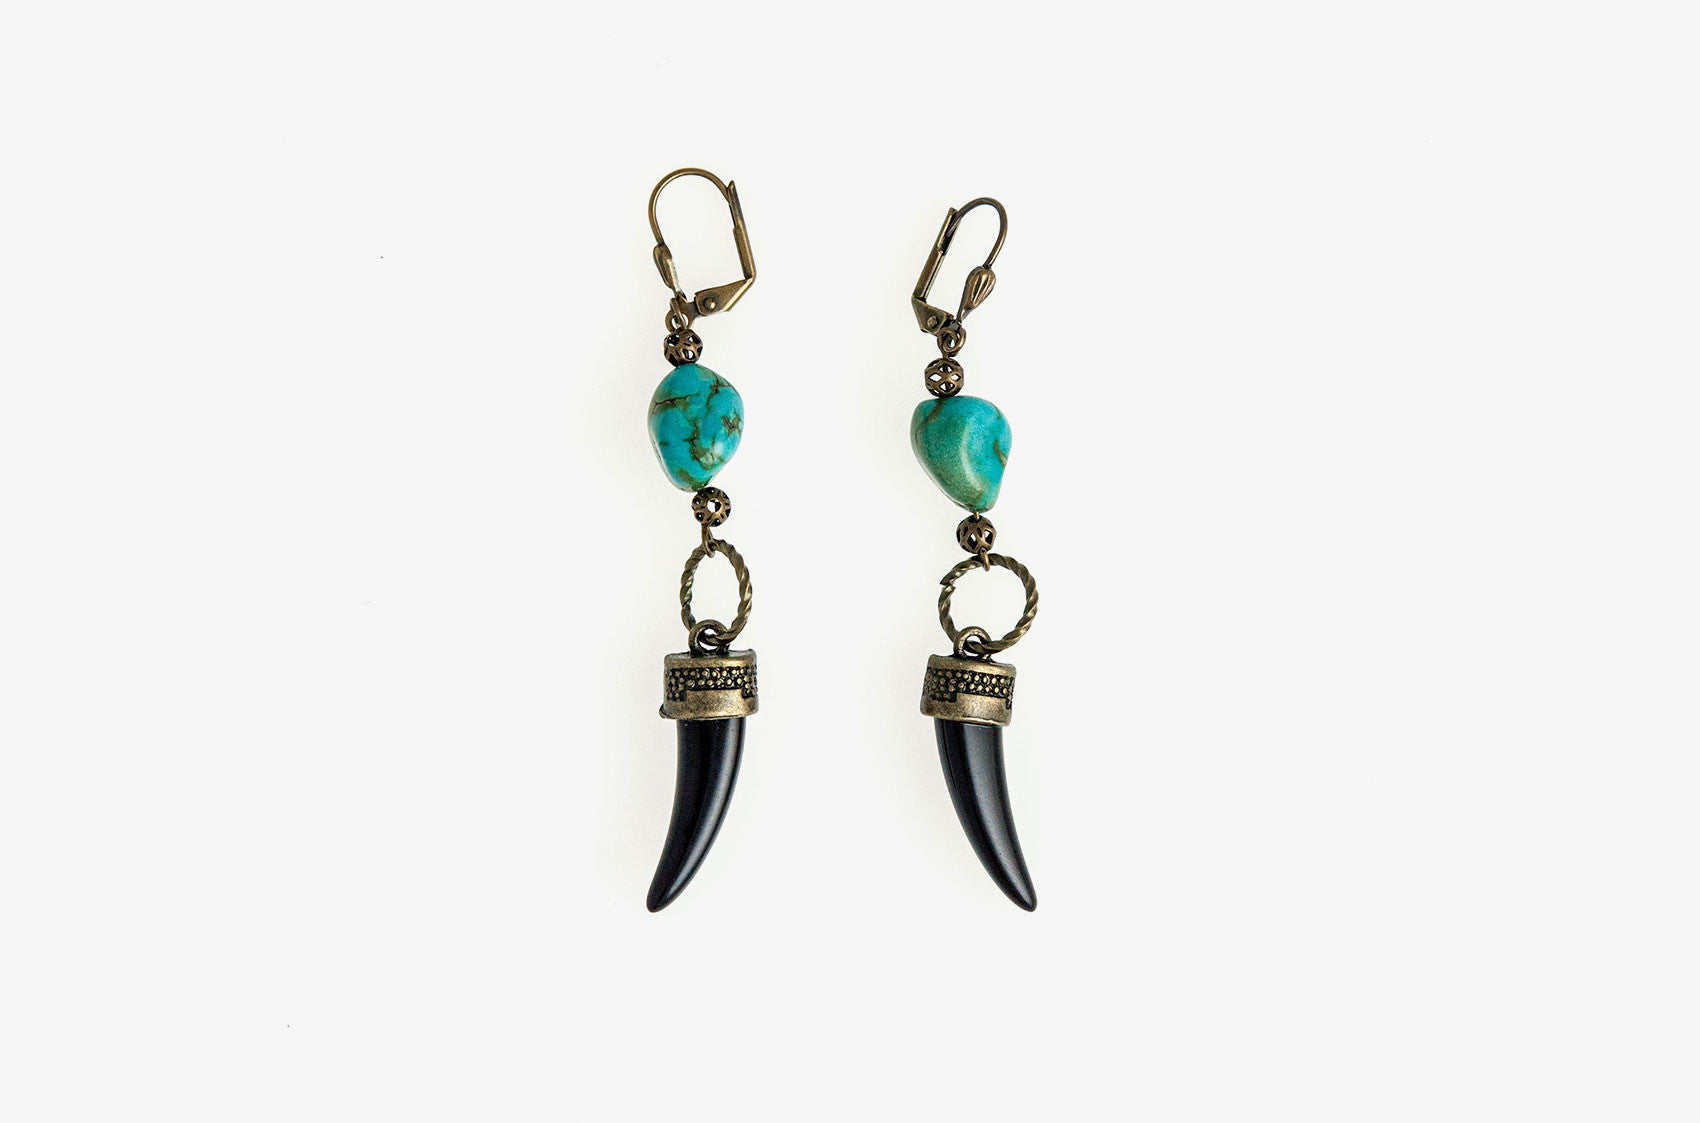 Metal & Stone. Brass and turquoise earrings